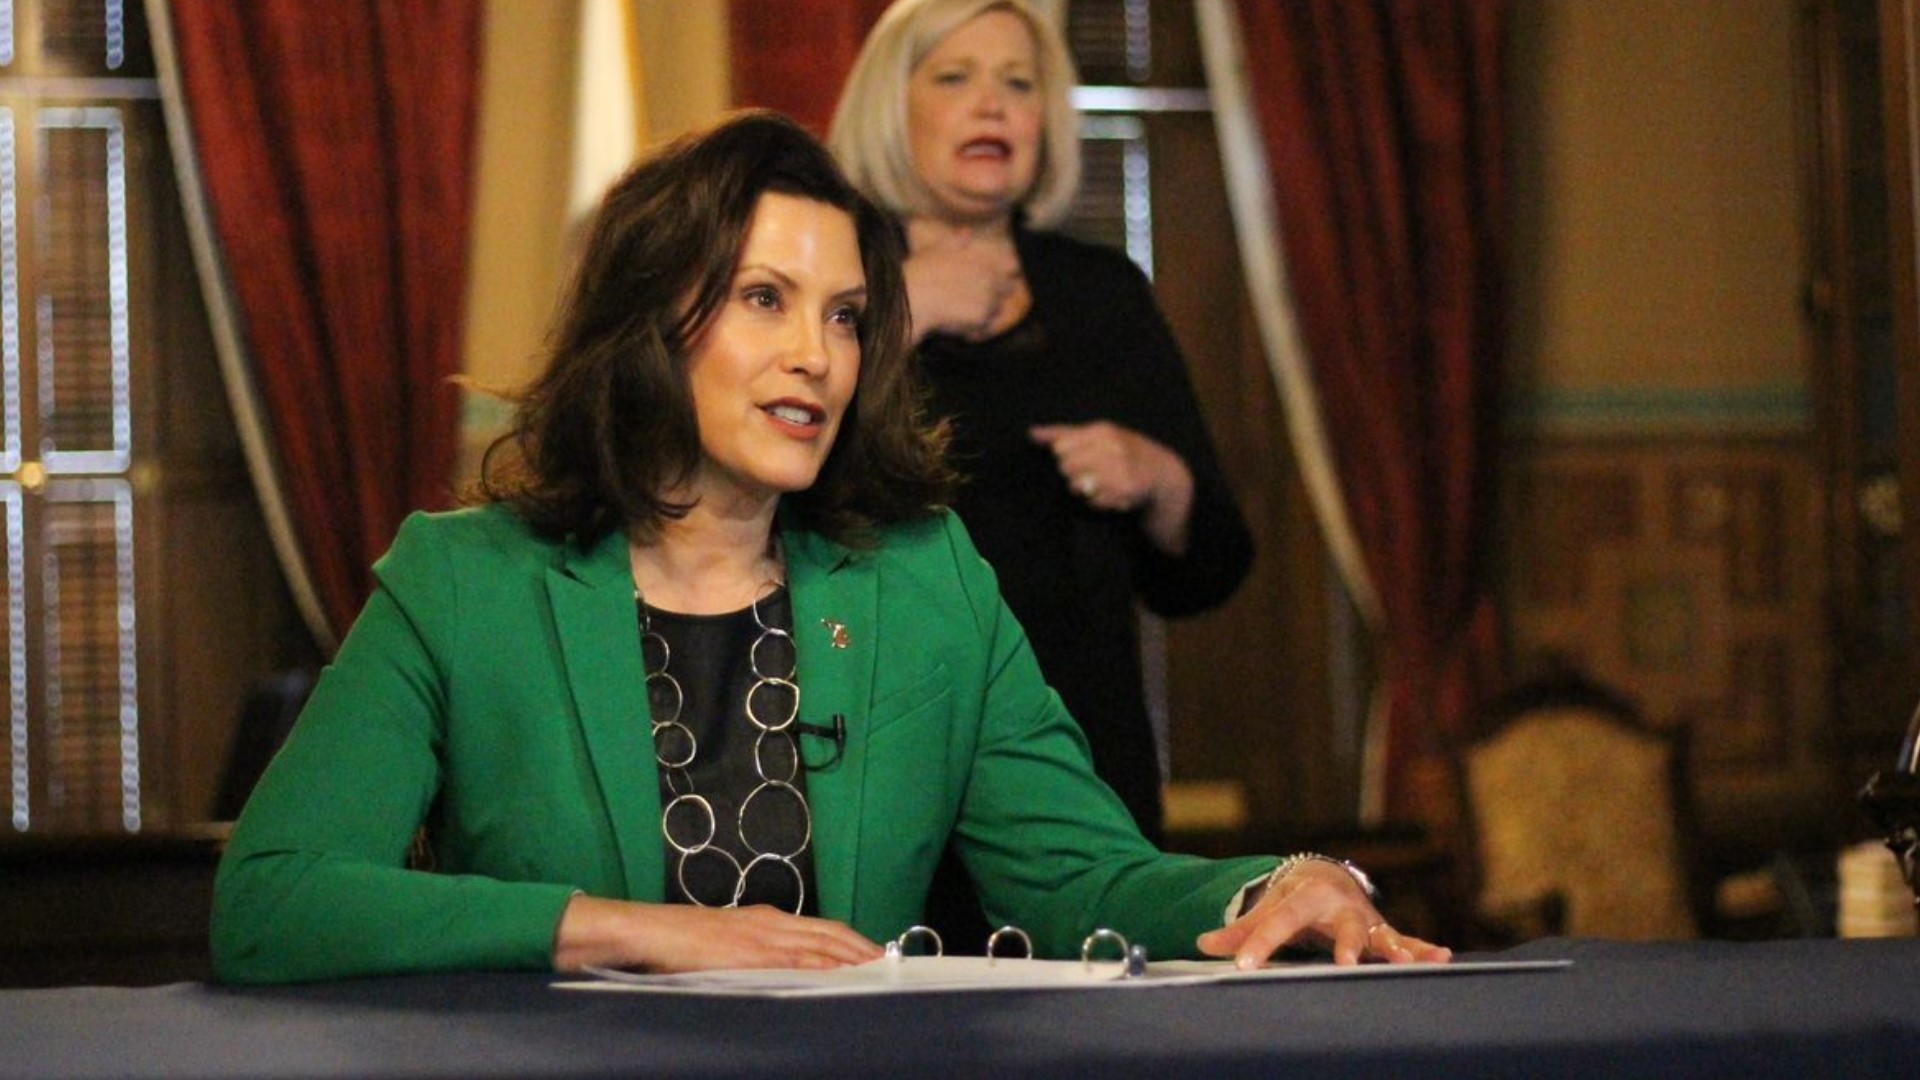 A lawsuit was filed against Gov. Gretchen Whitmer on Tuesday over her stay at home order.